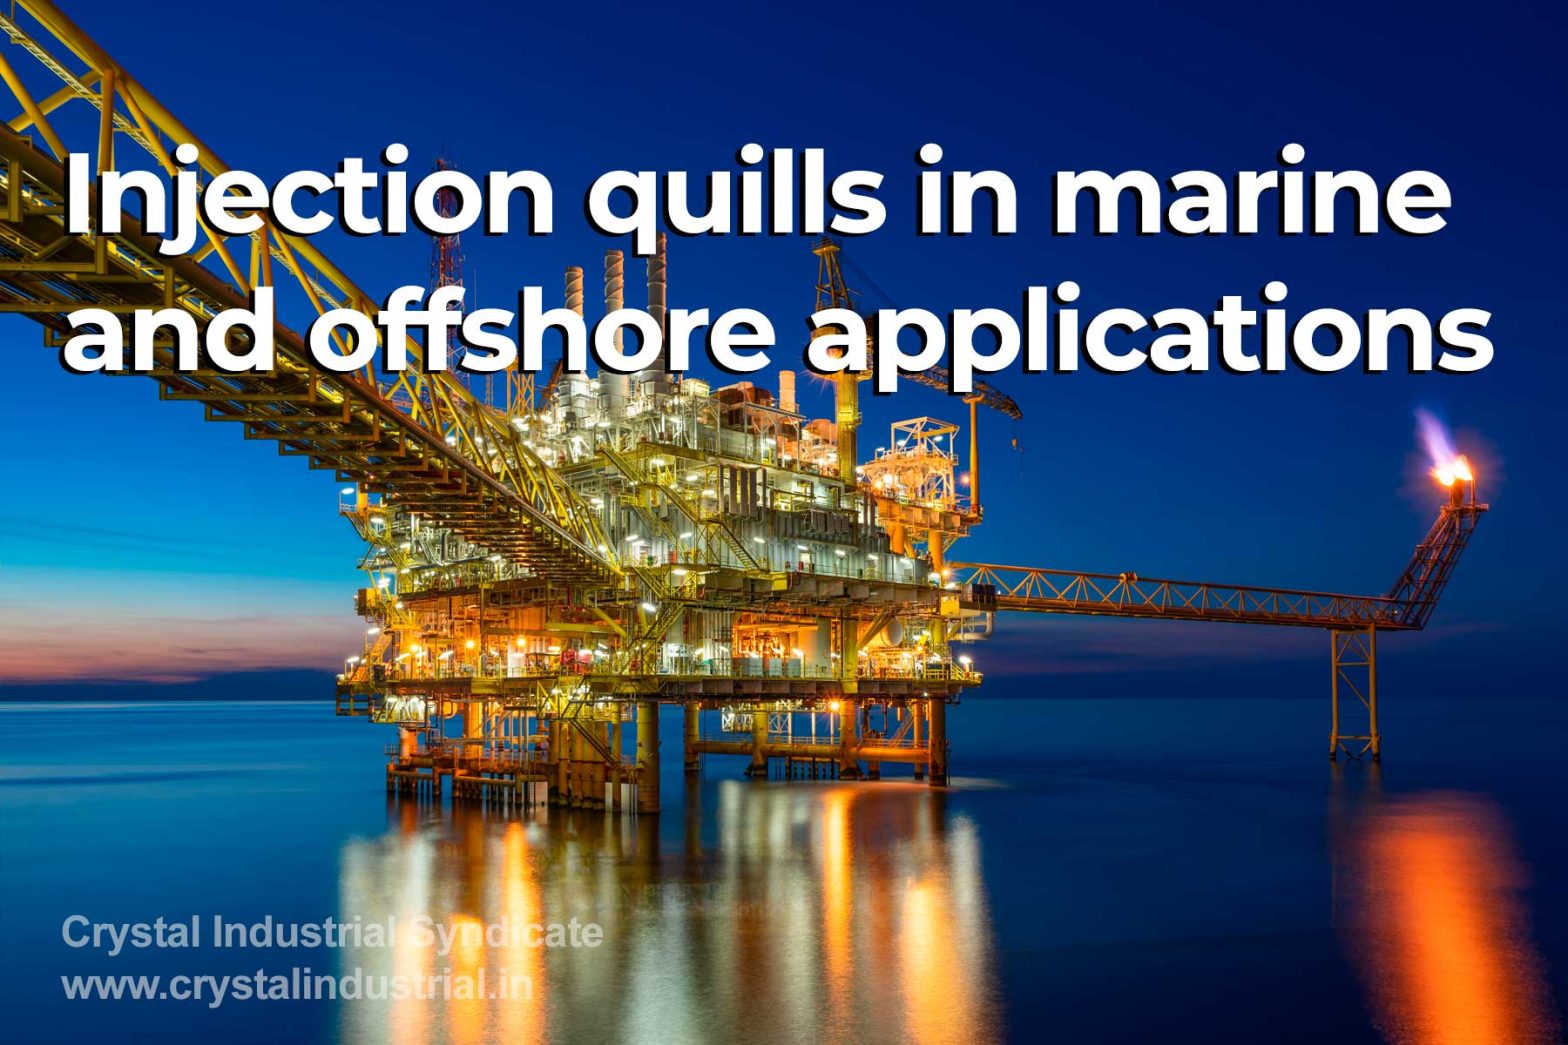 Injection quills for fire suppression, corrosion control and waste water management in marine and offshore applications